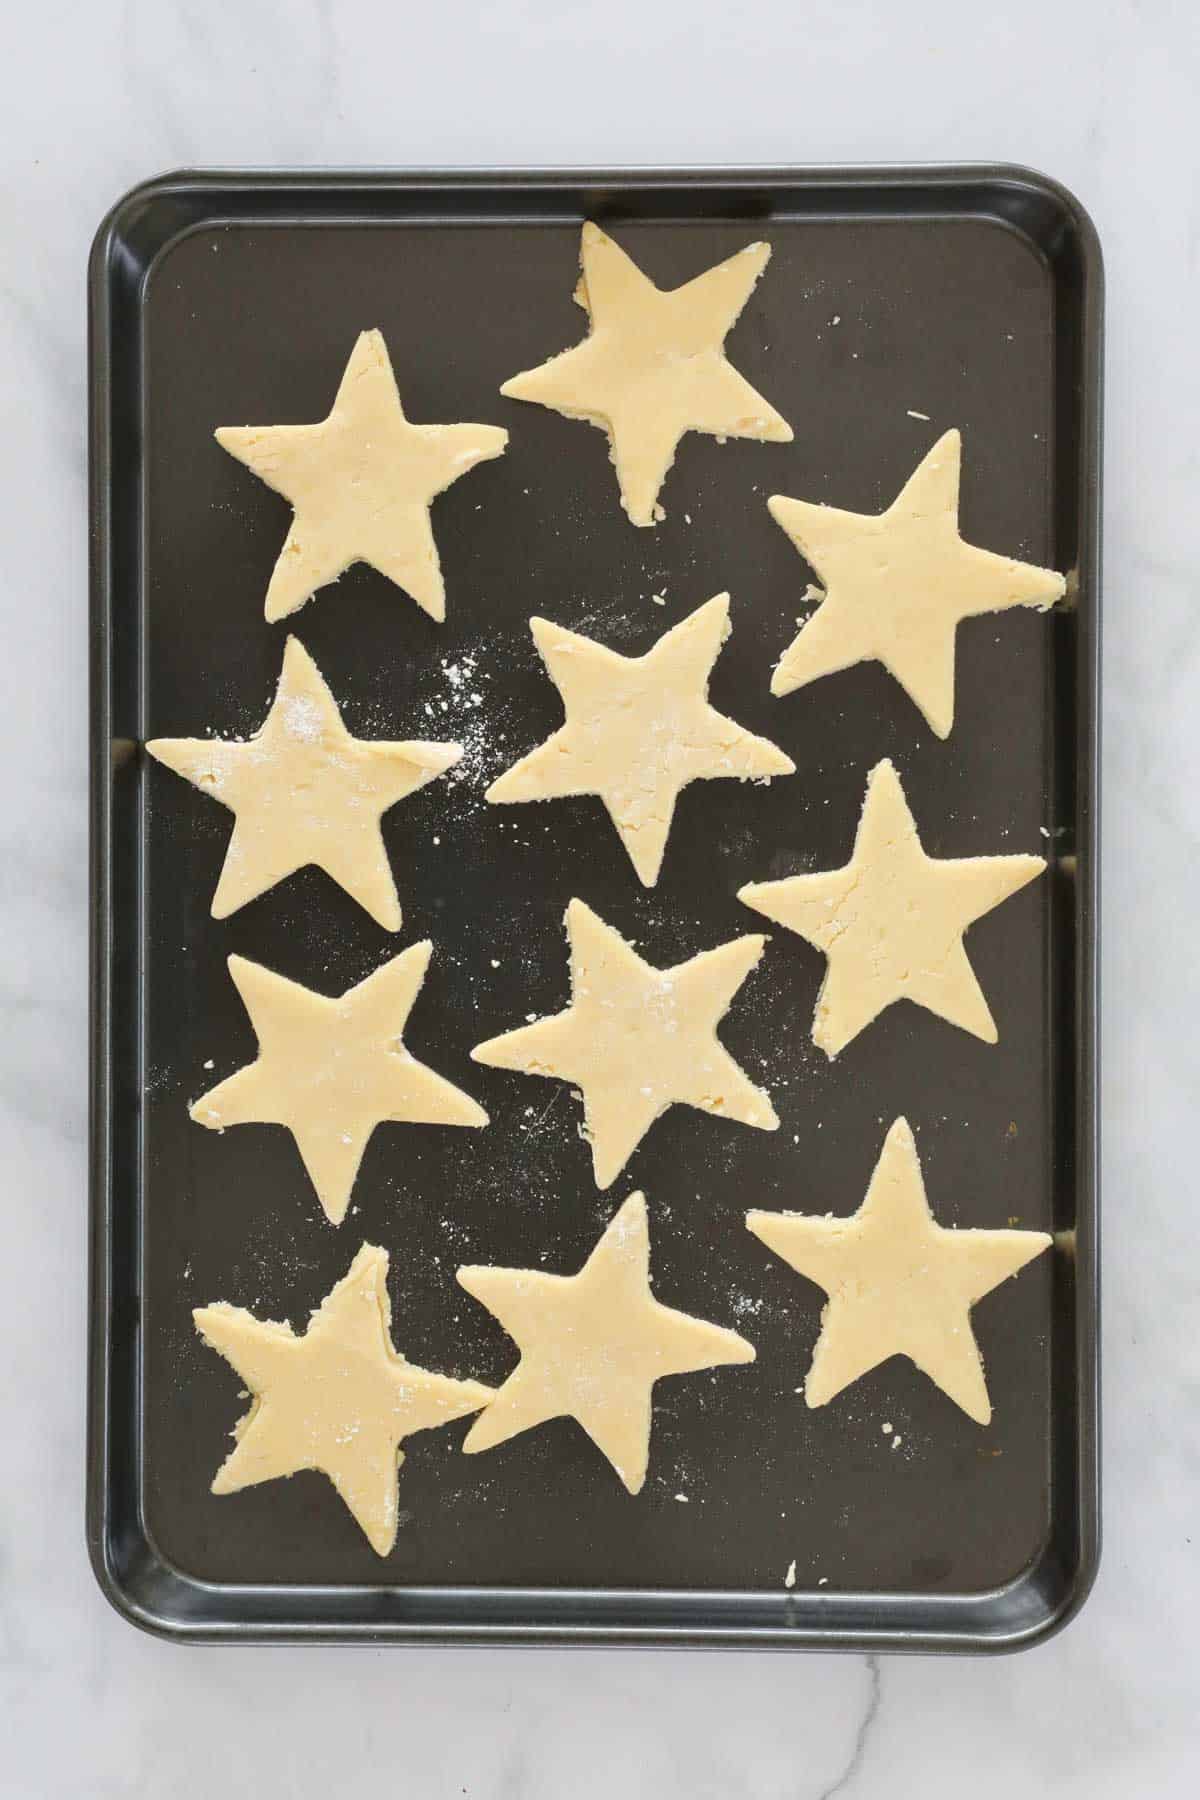 Star cookies on a baking tray.